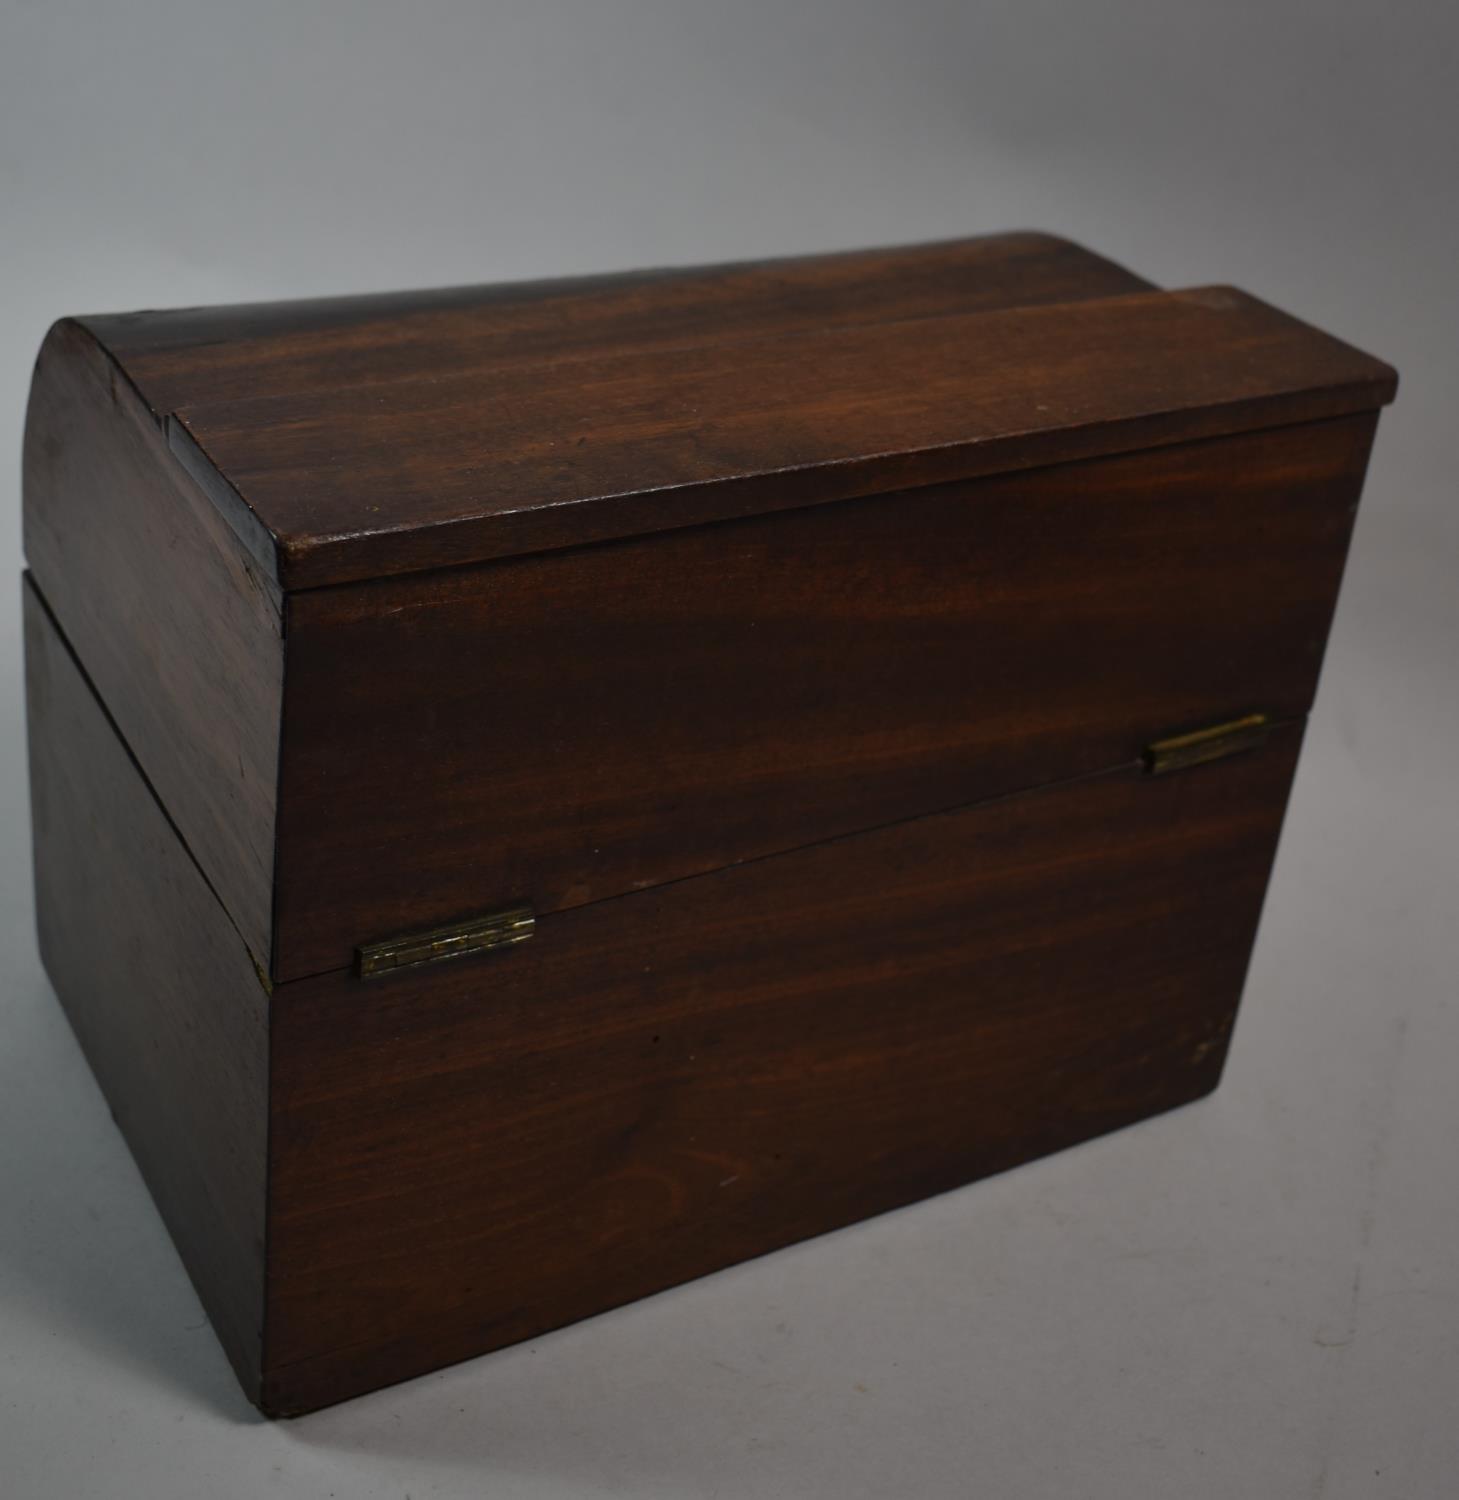 A Georgian Mahogany Domed Topped Decanter Box/Tantalus for Restoration, Containing Three Glass - Image 4 of 4